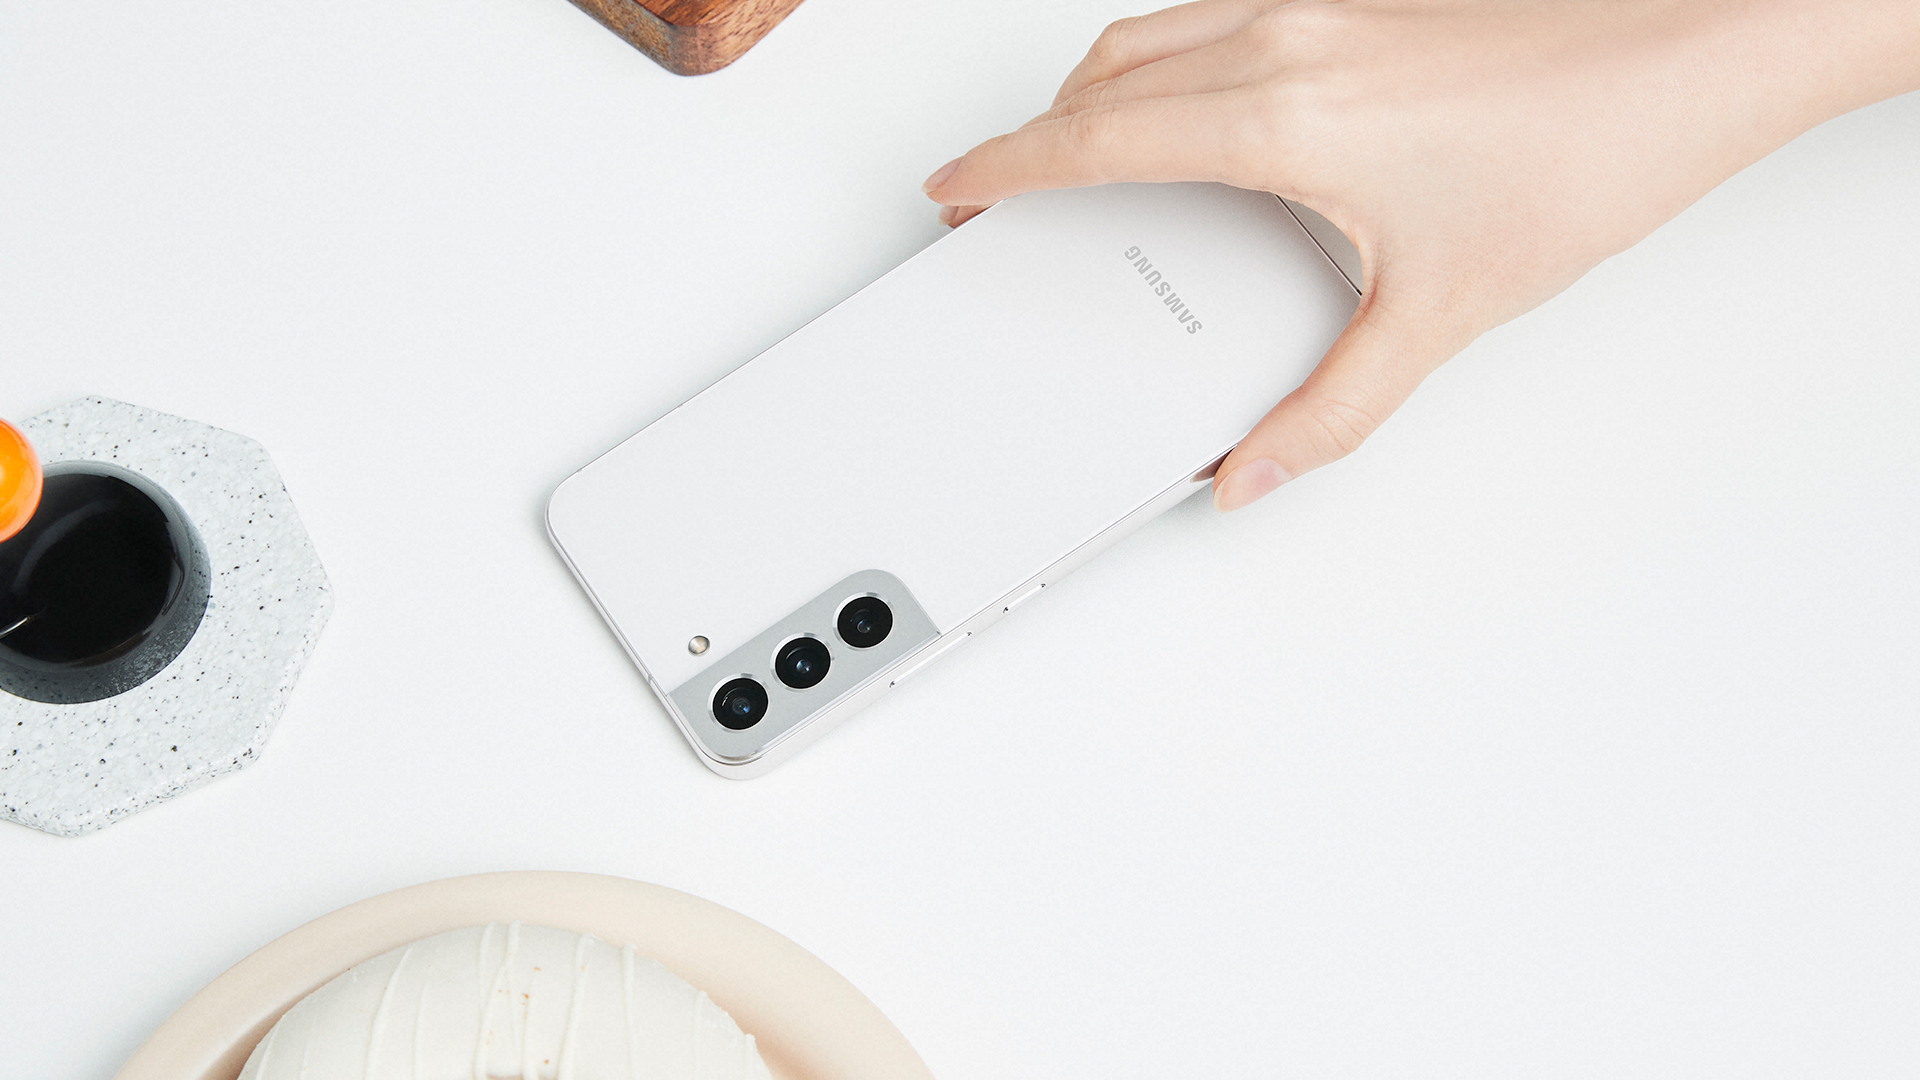 The Samsung Galaxy S22 in white.